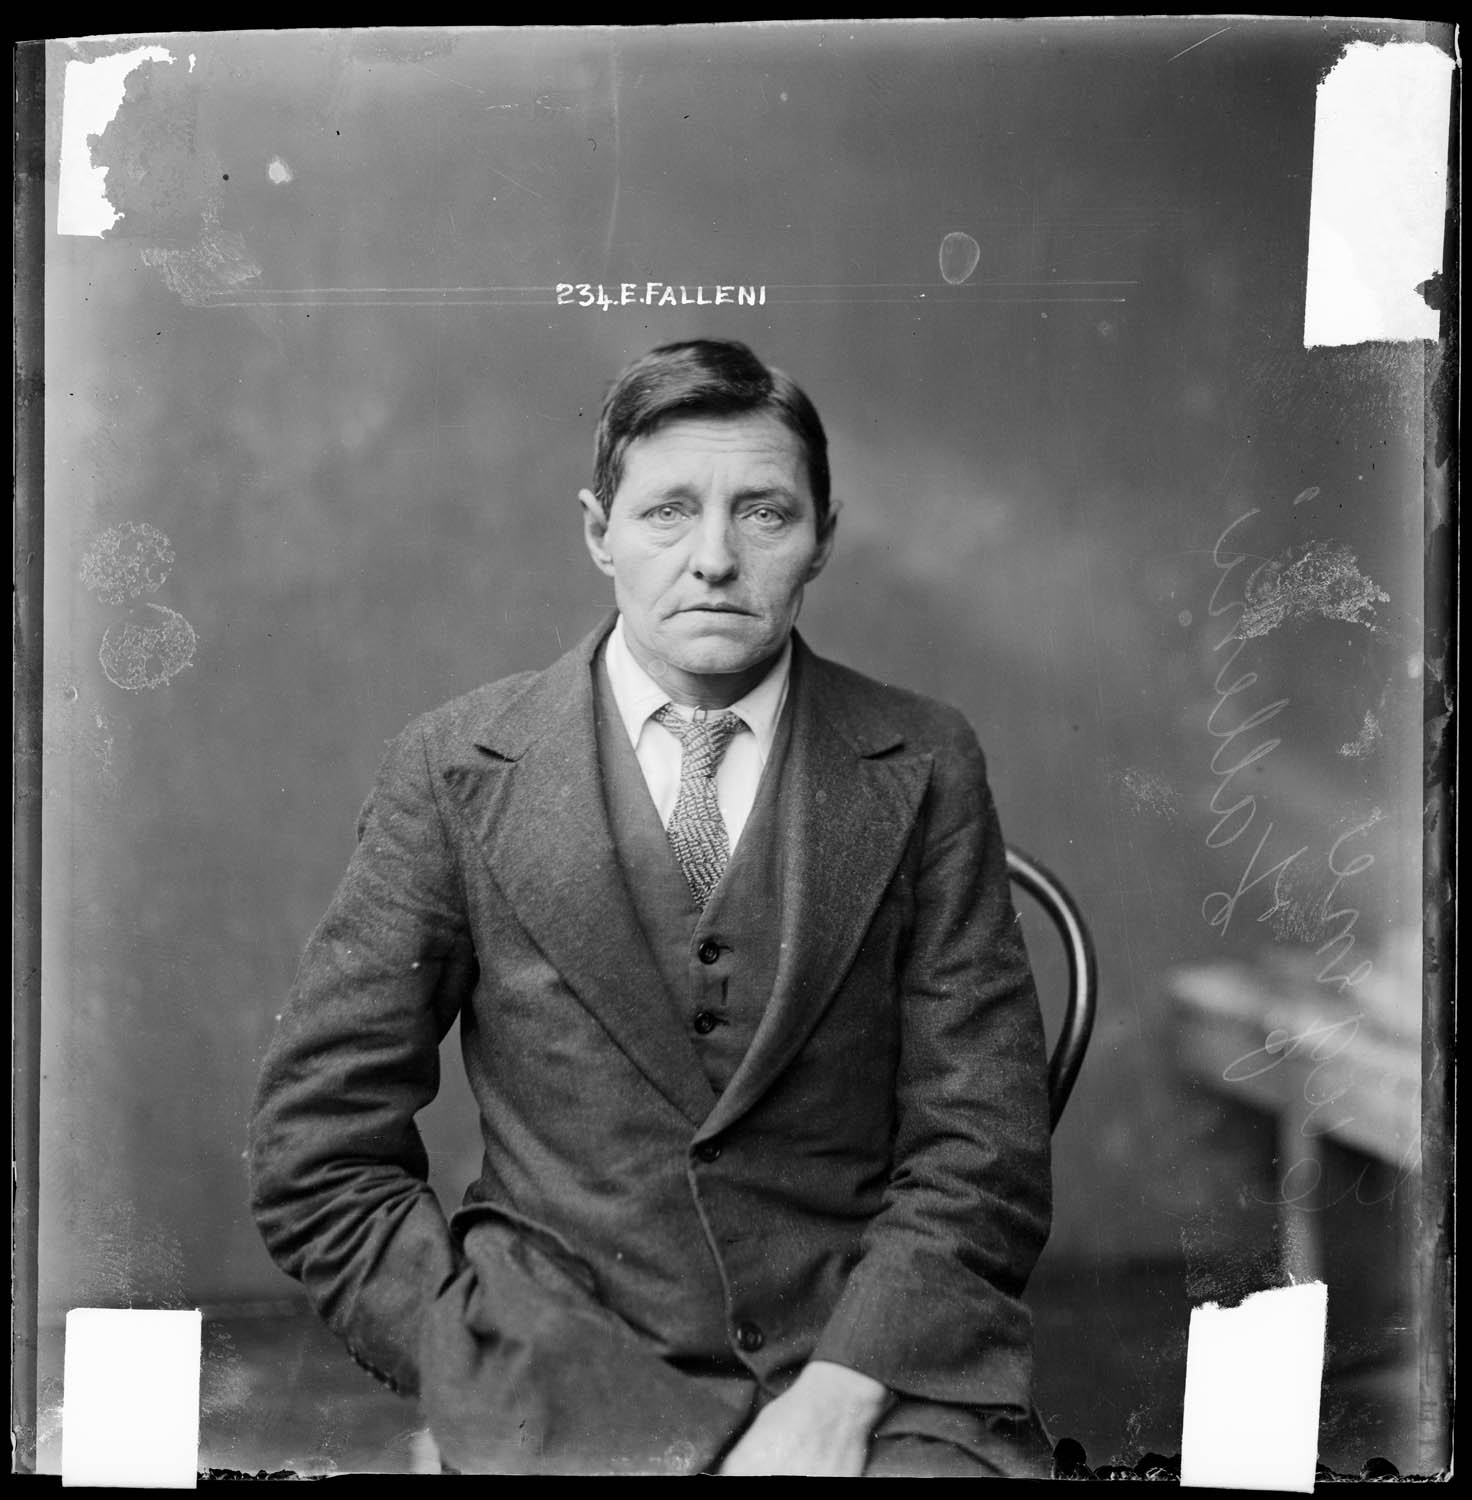 Eugenia Falleni, alias Harry Crawford, special           photograph number 234, Central Police Station Sydney, 1920.